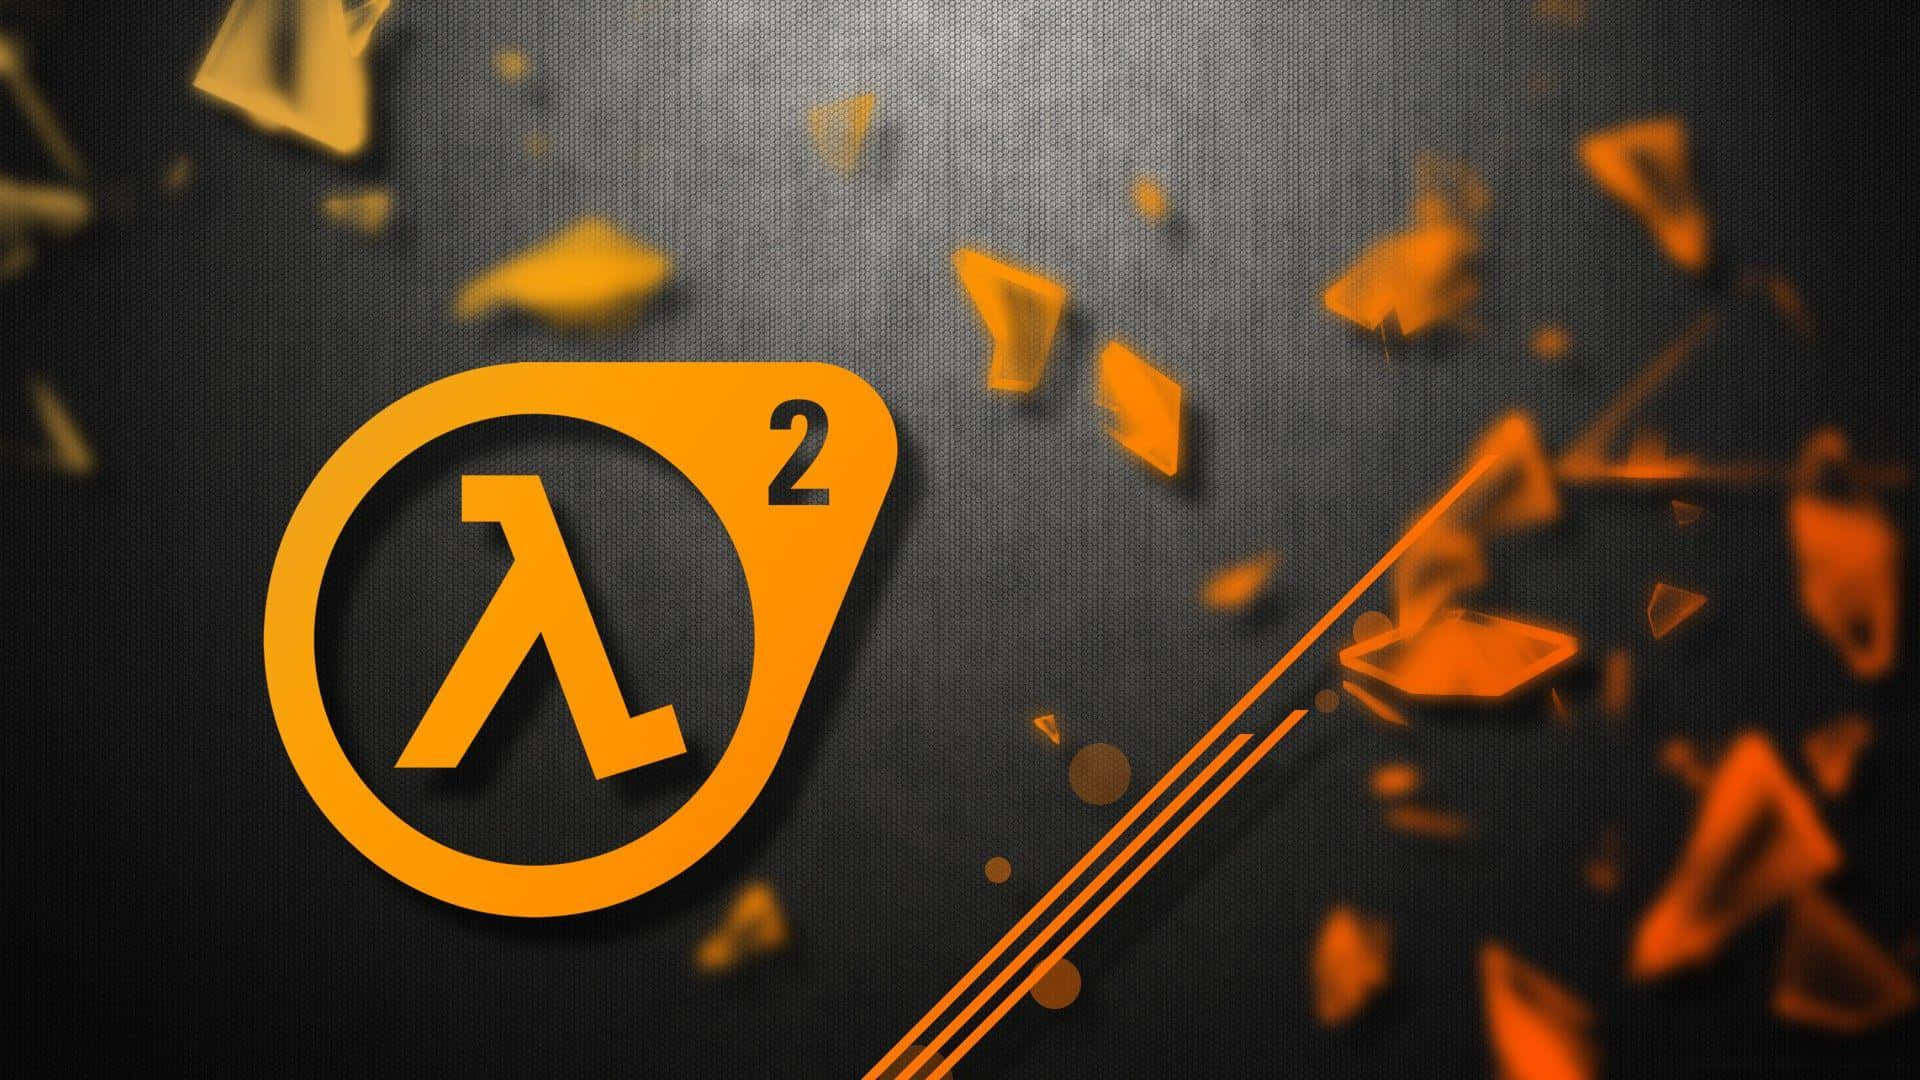 Free Half Life 2 Wallpaper Downloads, [100+] Half Life 2 Wallpapers for  FREE 